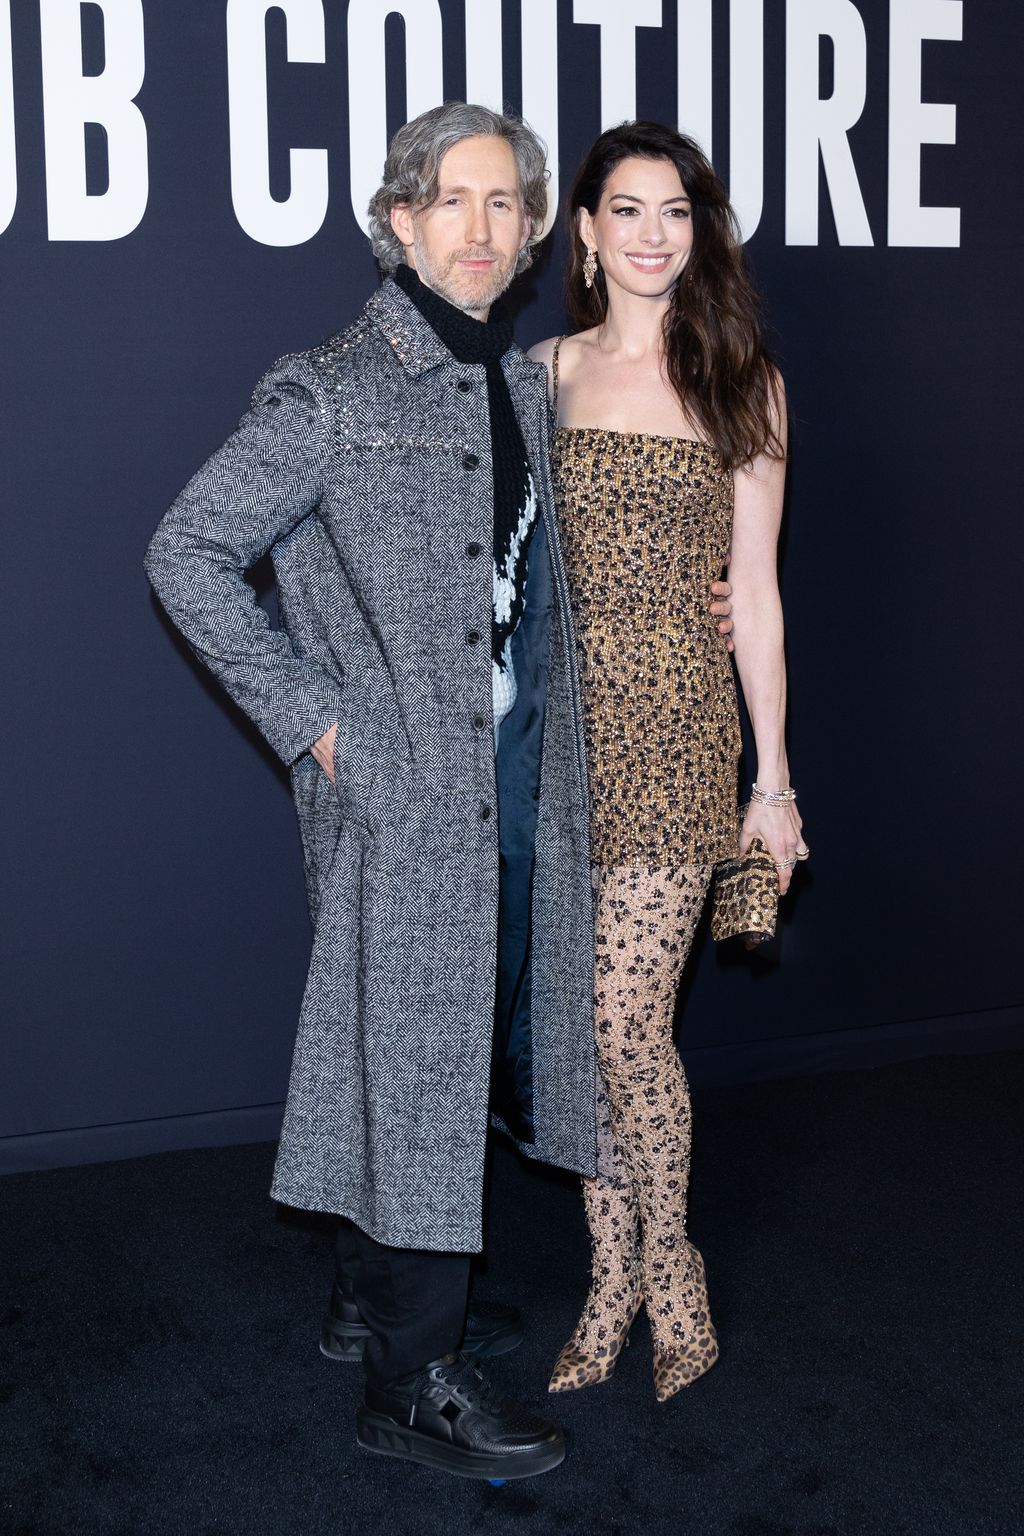 PARIS, FRANCE - JANUARY 25: (EDITORIAL USE ONLY - For Non-Editorial use please seek approval from Fashion House) (L-R) Adam Shulman and Anne Hathaway attend the Valentino Haute Couture Spring Summer 2023 show as part of Paris Fashion Week on January 25, 2023 in Paris, France. (Photo by Marc Piasecki/WireImage)